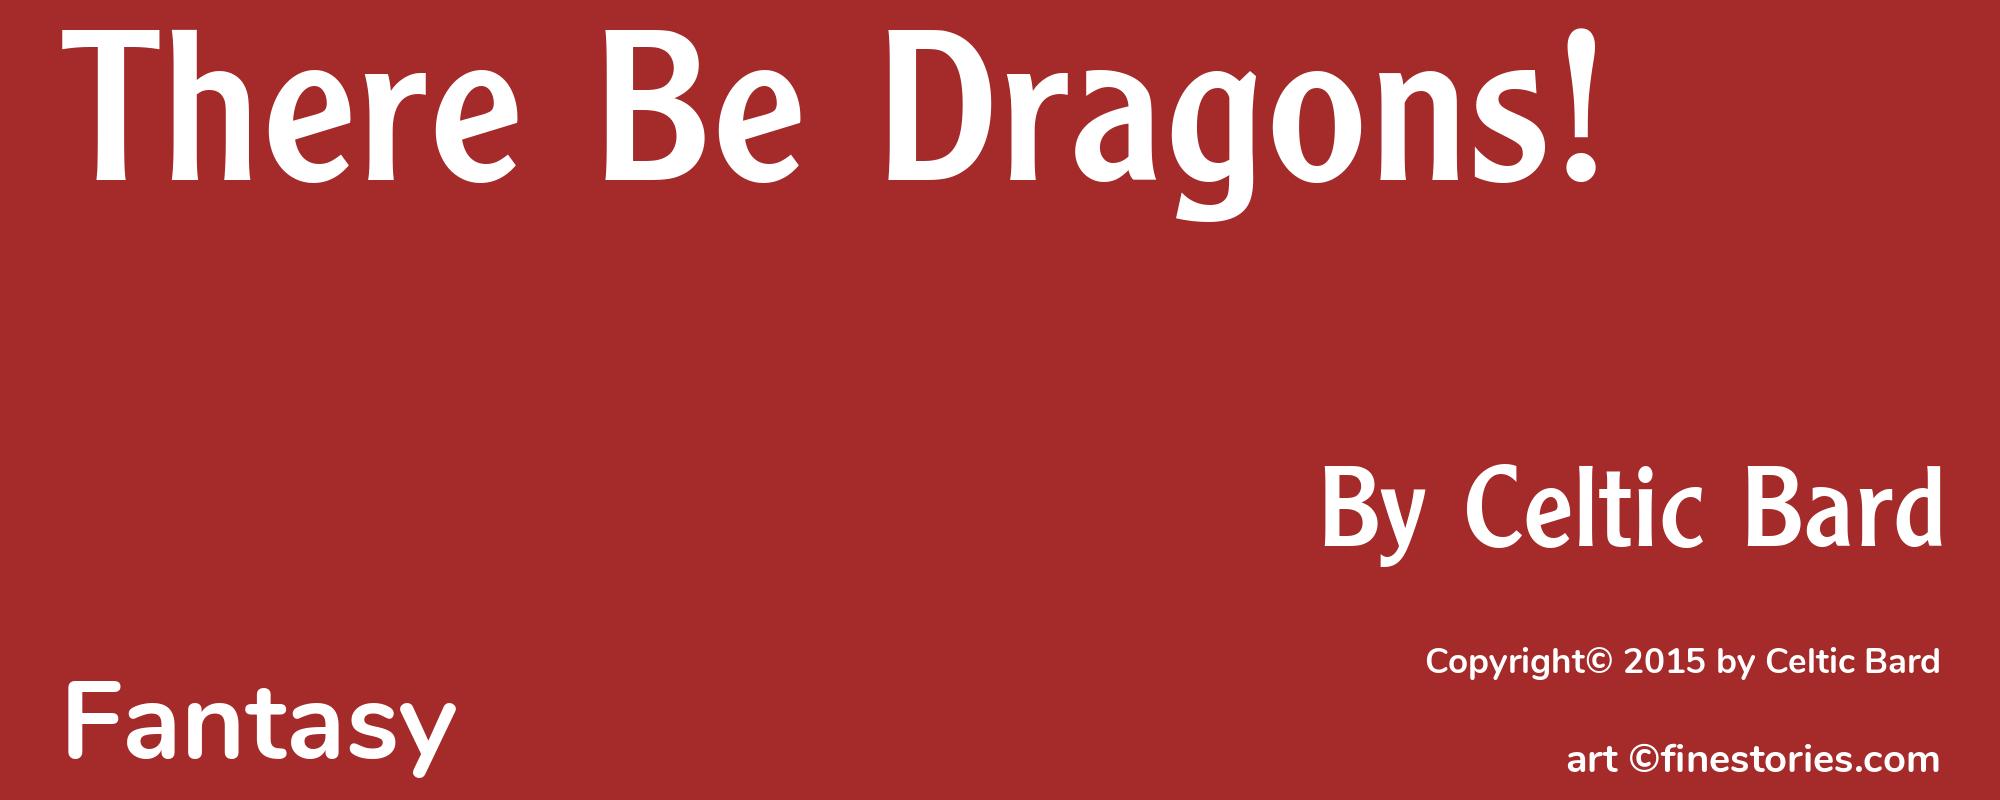 There Be Dragons! - Cover